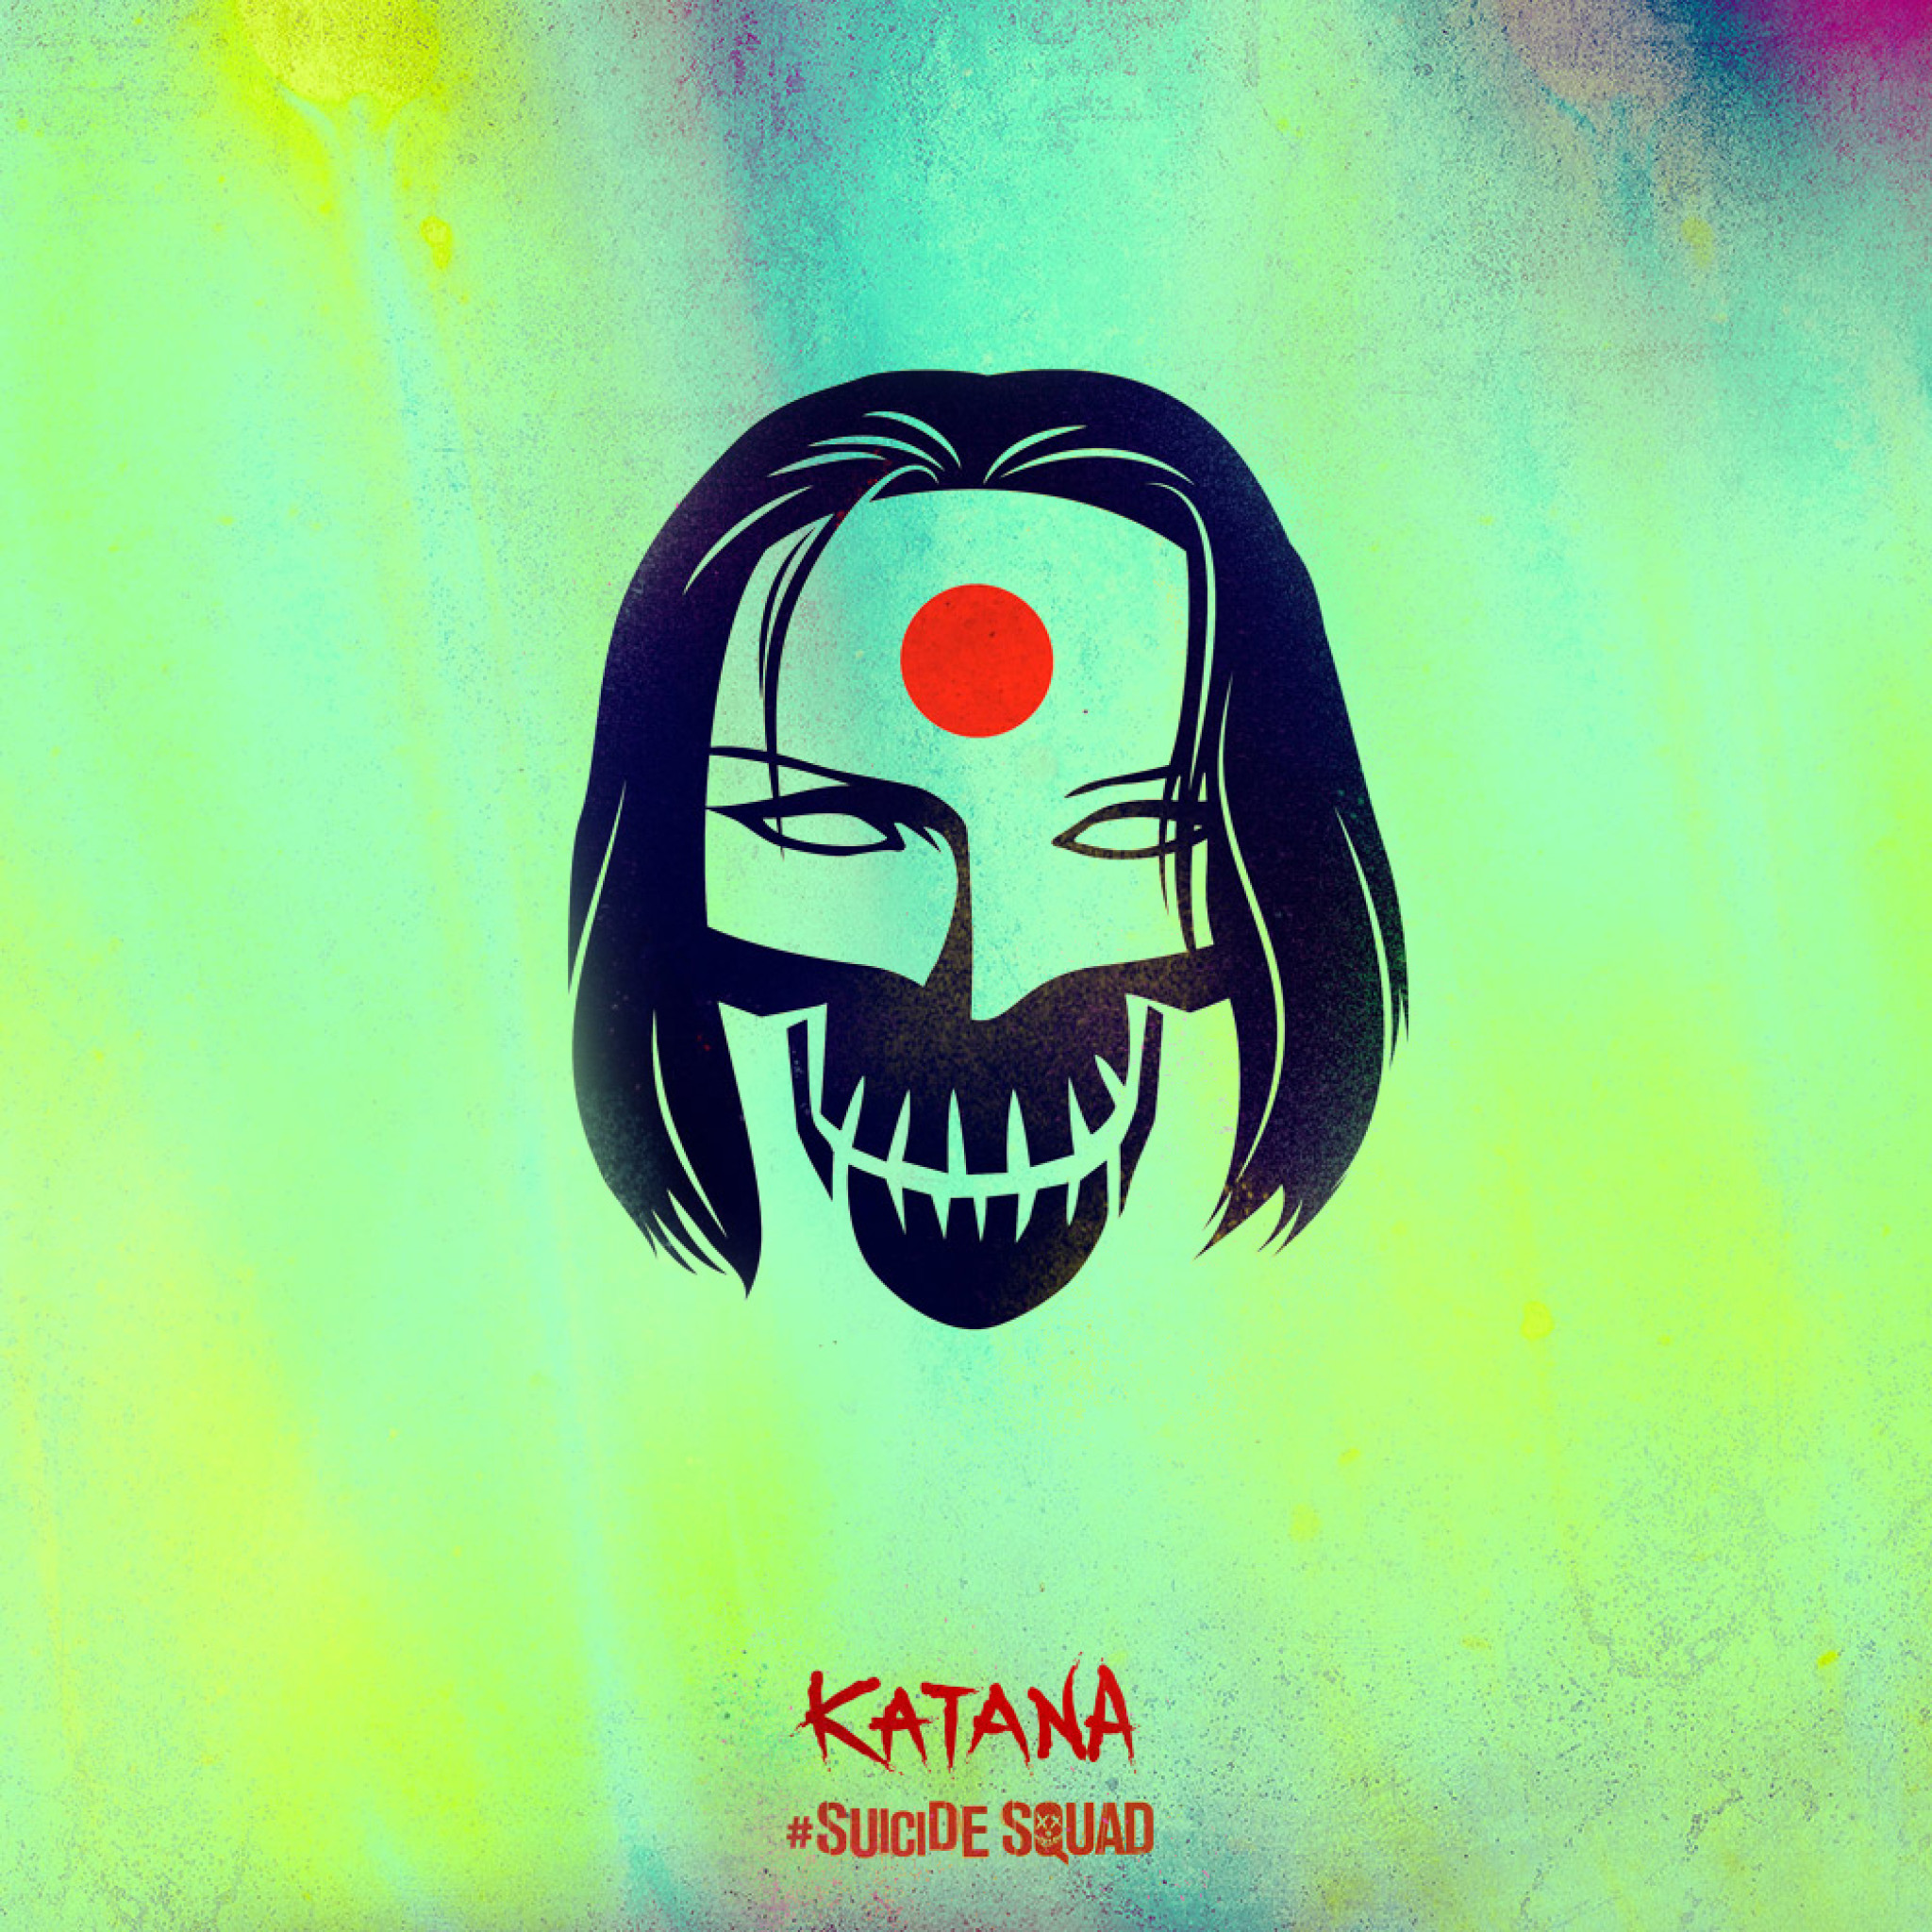 2048x2048 Katana - Tap to see more awesomely creative Suicide squad wallpapers!  @mobile9